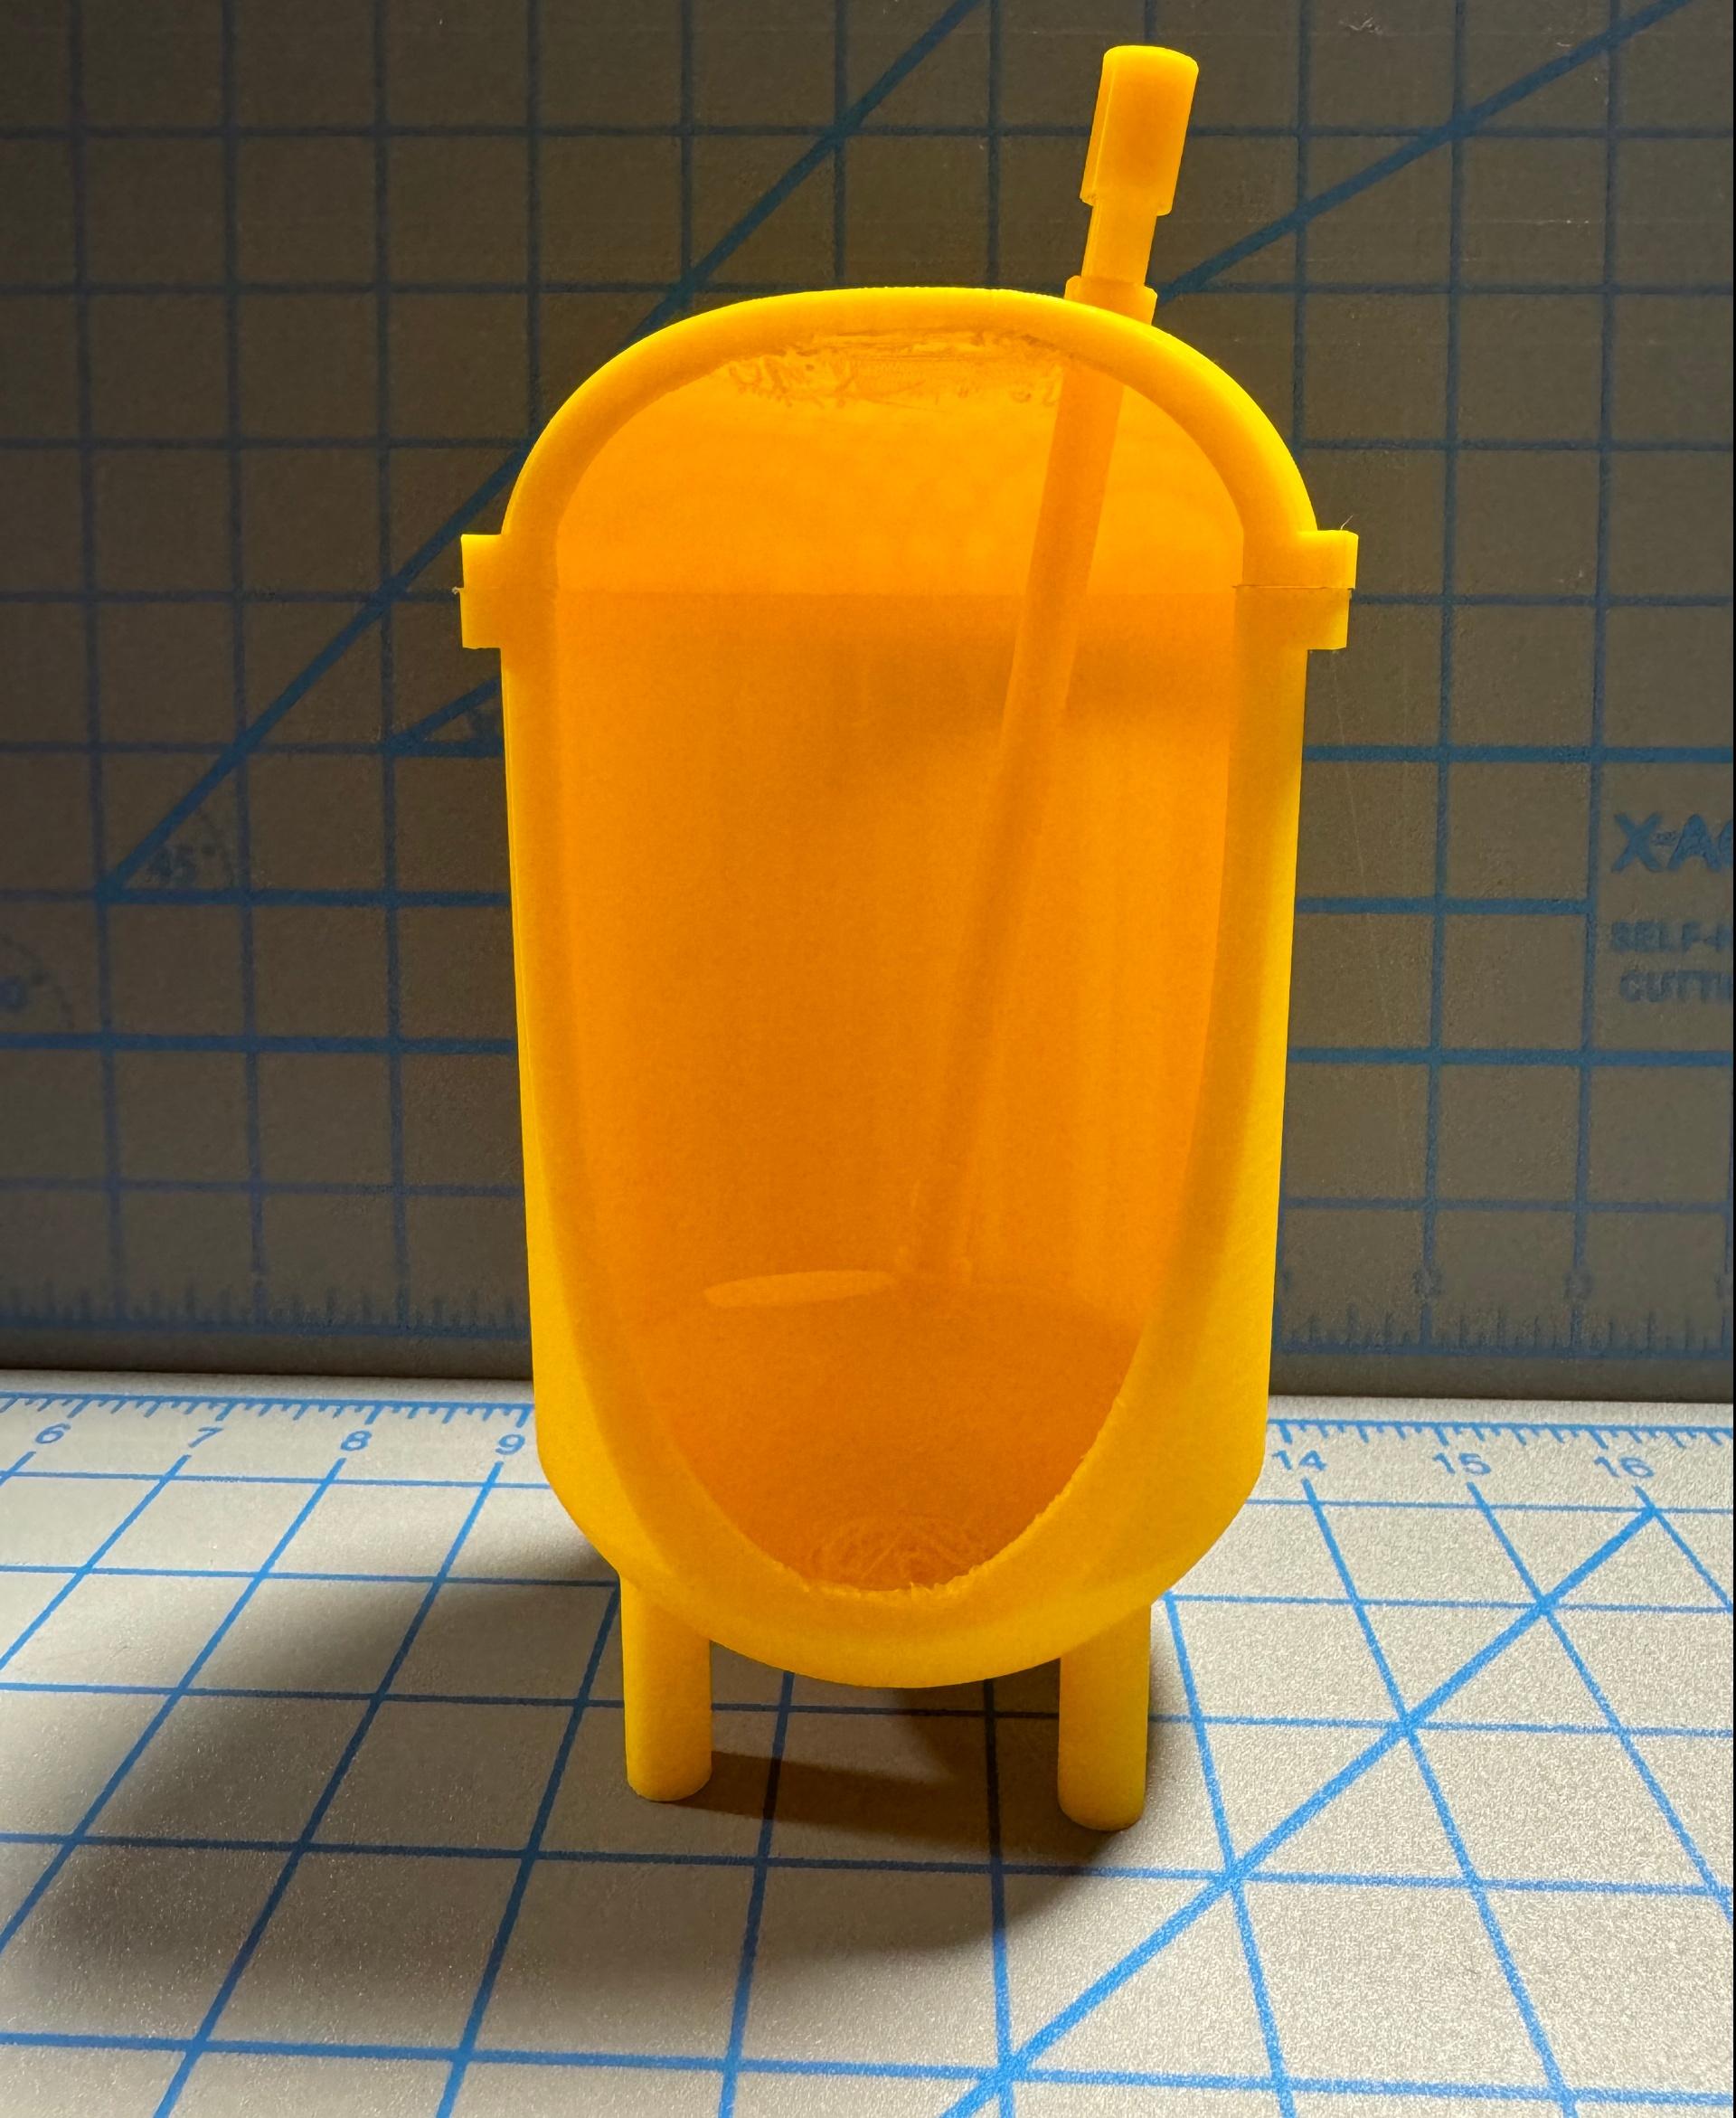 Bioreactor - 4 piece print worked out great. I should have changed colors for the agitator parts, but it came out without issues.
Nice job with the design! Thanks for sharing. - 3d model